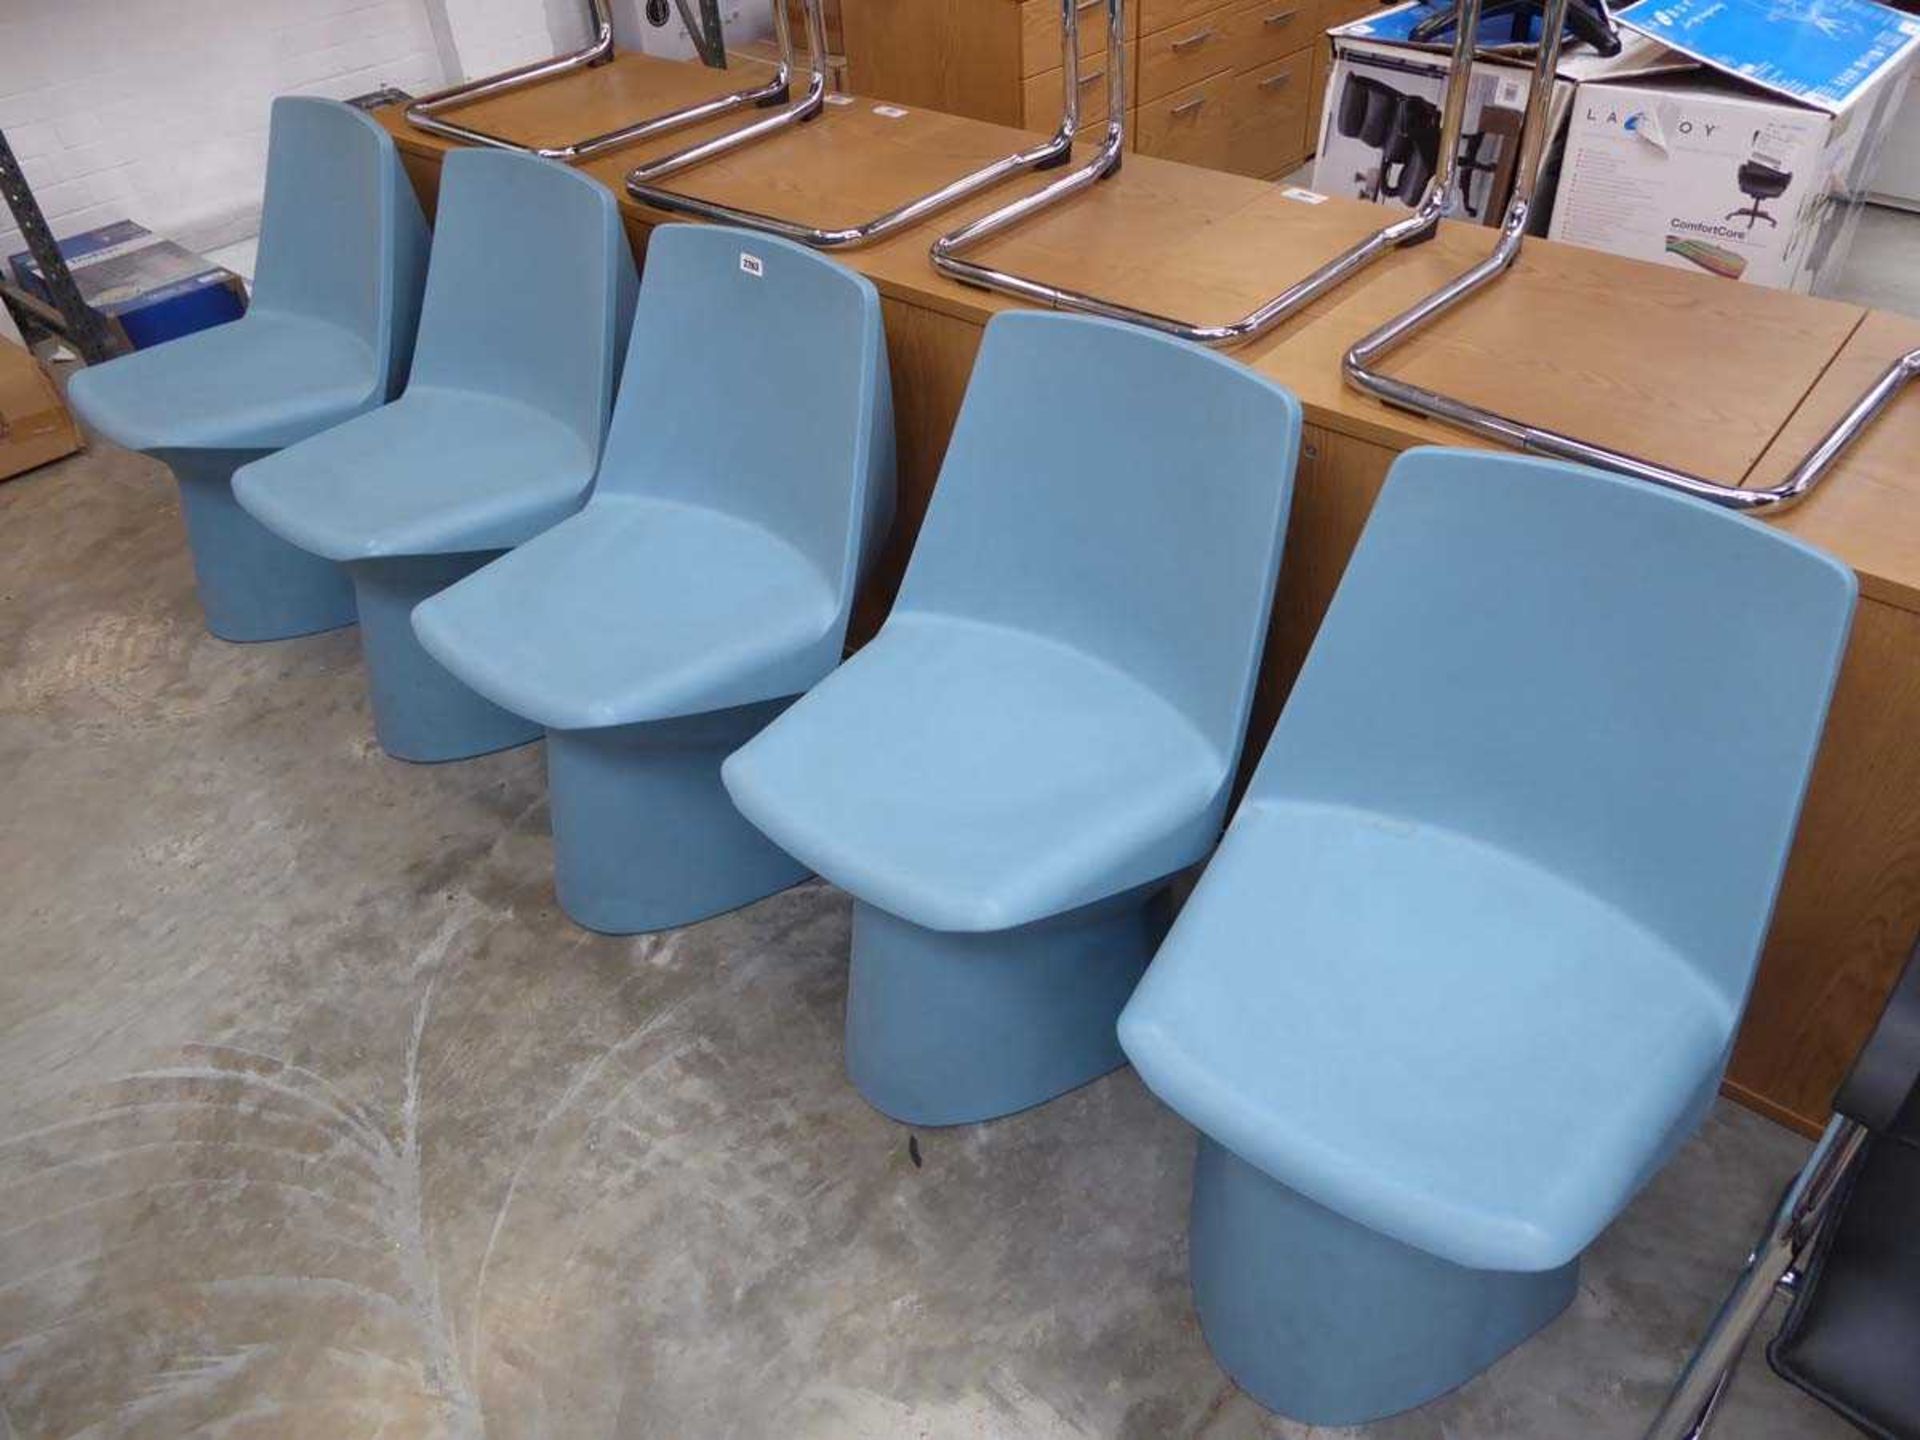 Set of 5 teal blue plastic commercial chairs